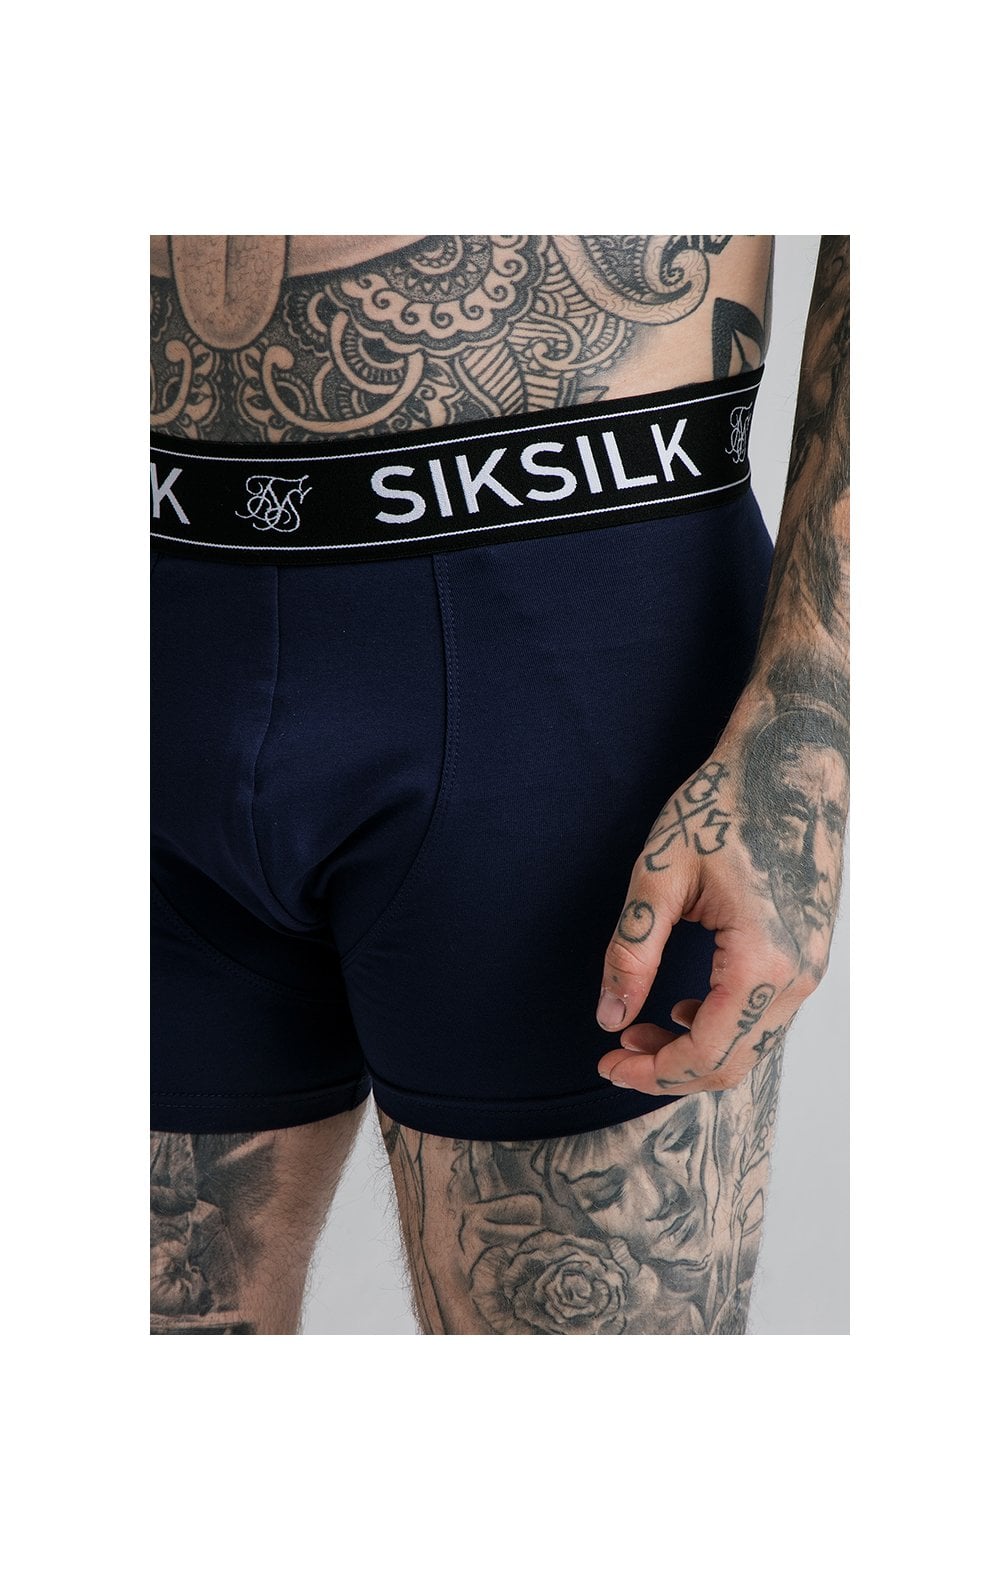 SikSilk Boxer Shorts (2 Pack)  - Red & Navy (4)